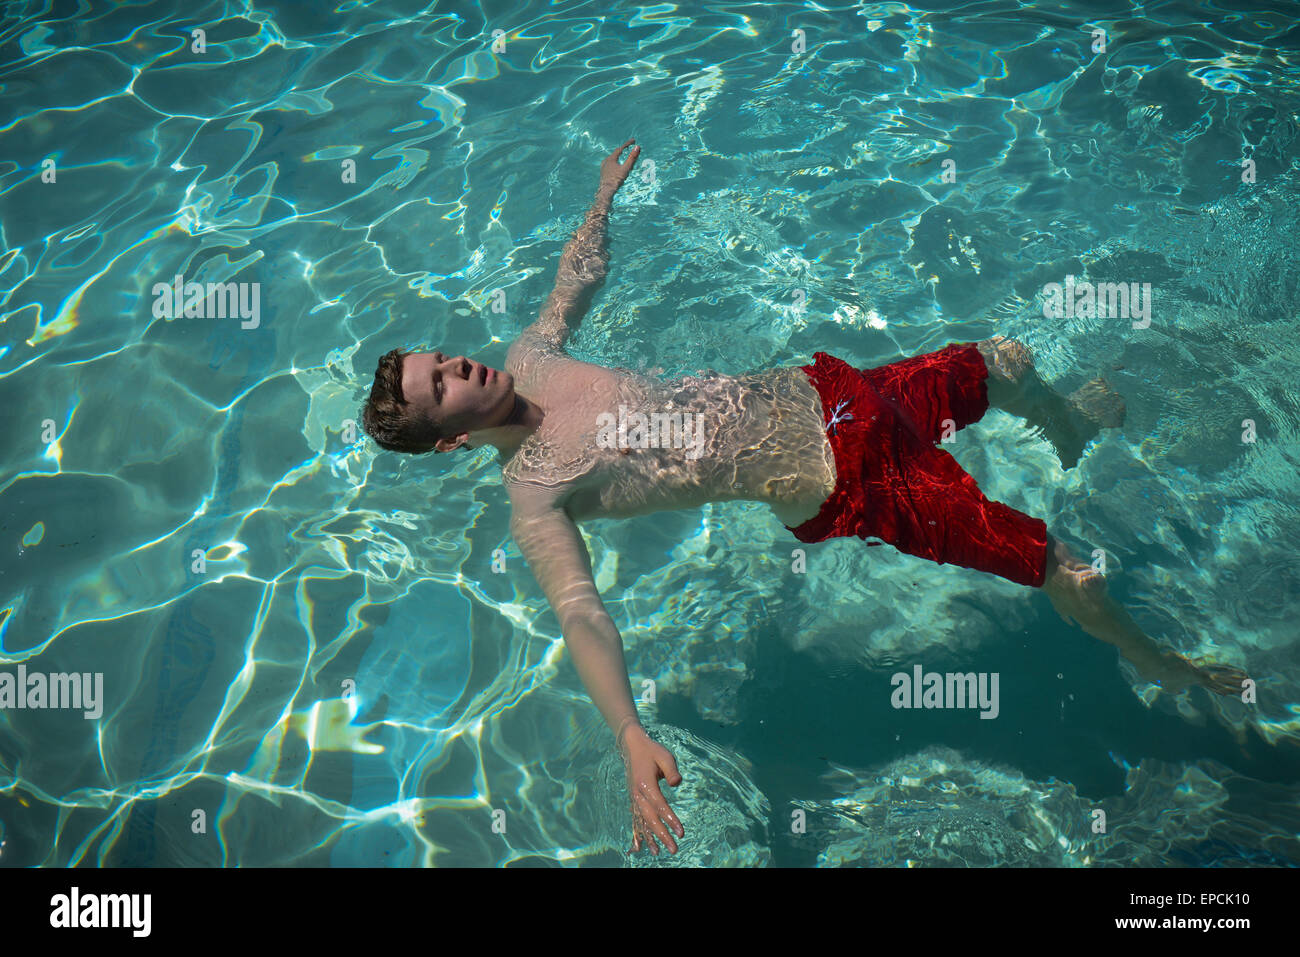 A teenage boy floats on his back in a swimming pool at Pells Pool, the oldest freshwater outdoor public swimming pool in the UK, in Lewes, East Sussex, England. Stock Photo